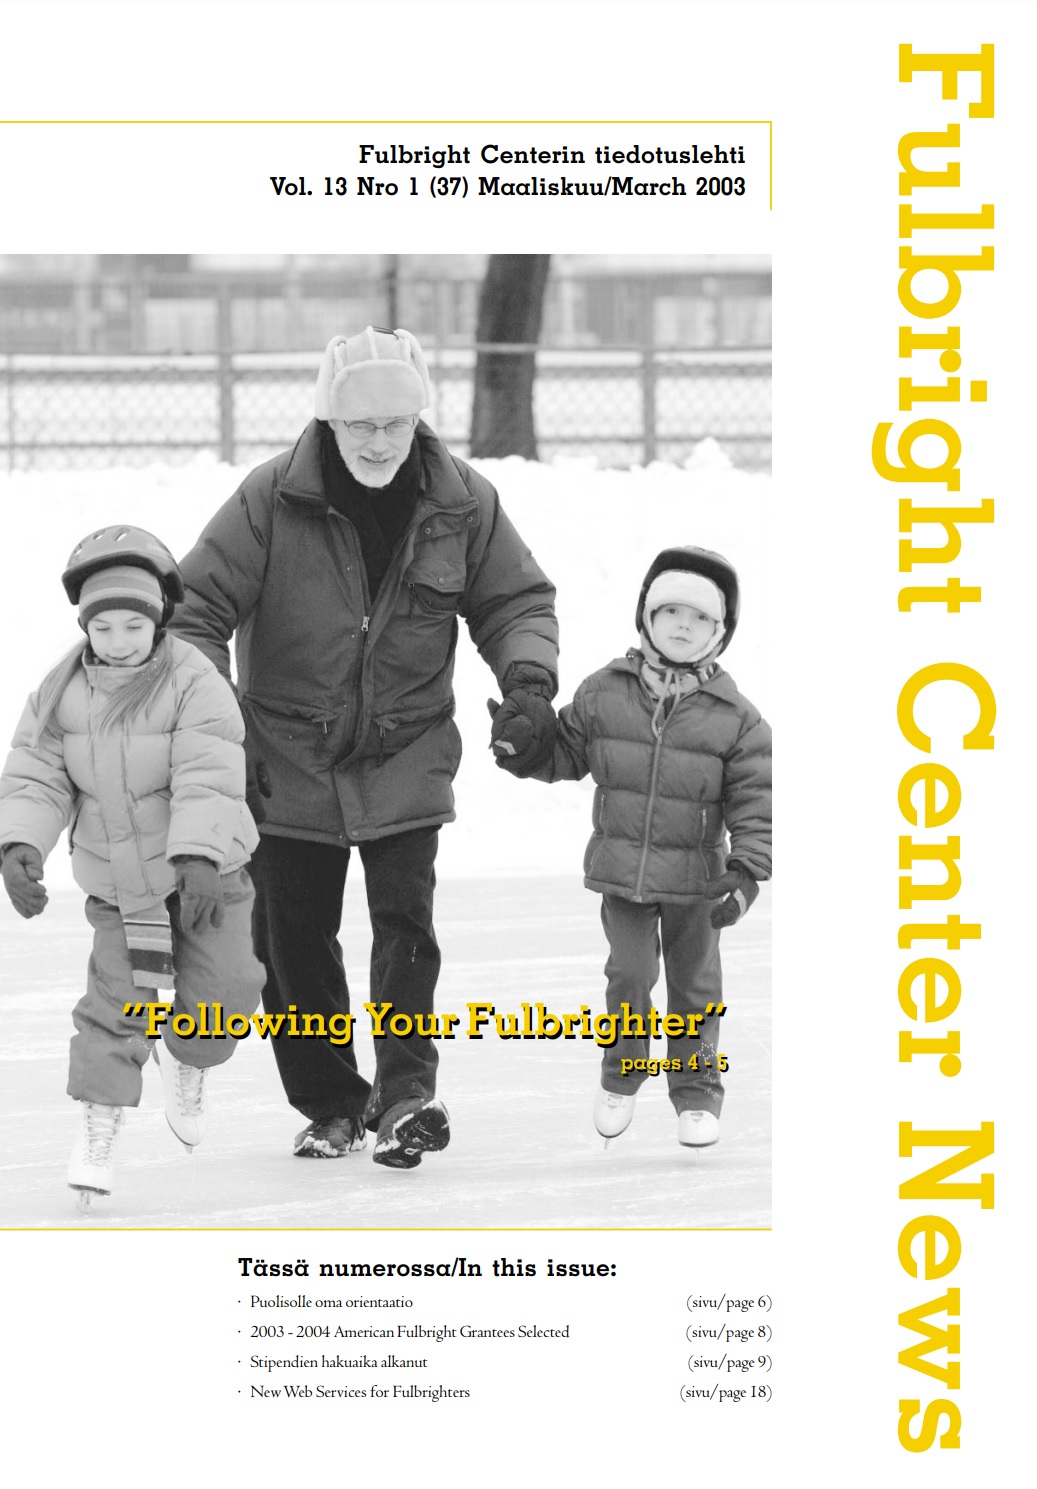 While in Finland, Cheryl Greenberg’s husband wrote an article about “following your Fulbrighter” for the Fulbright Center News.